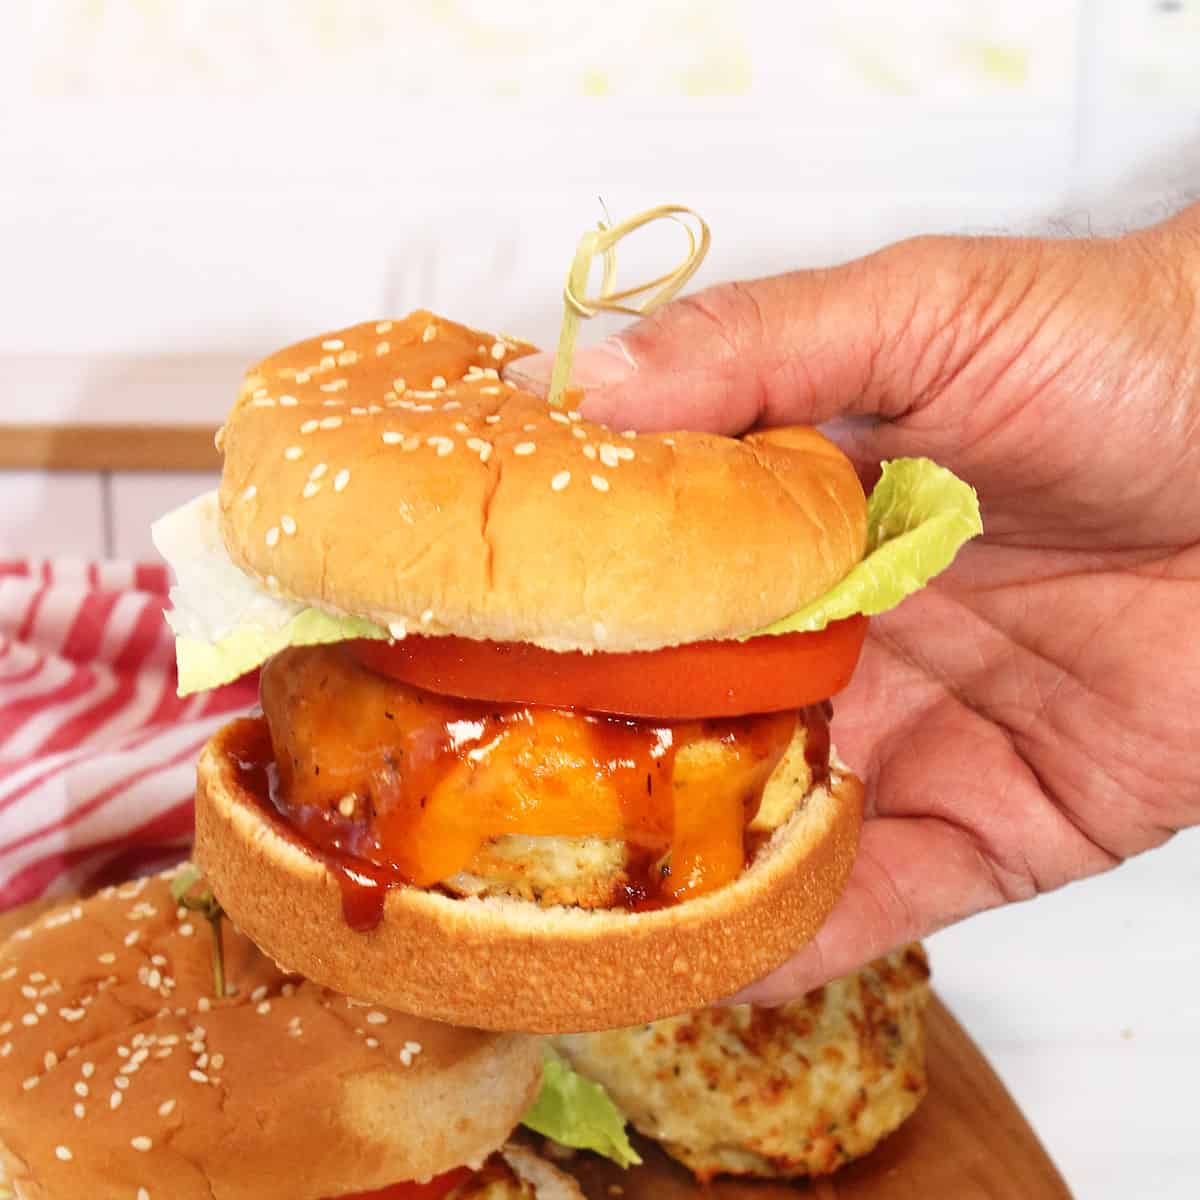 Holding burger with garnishes.